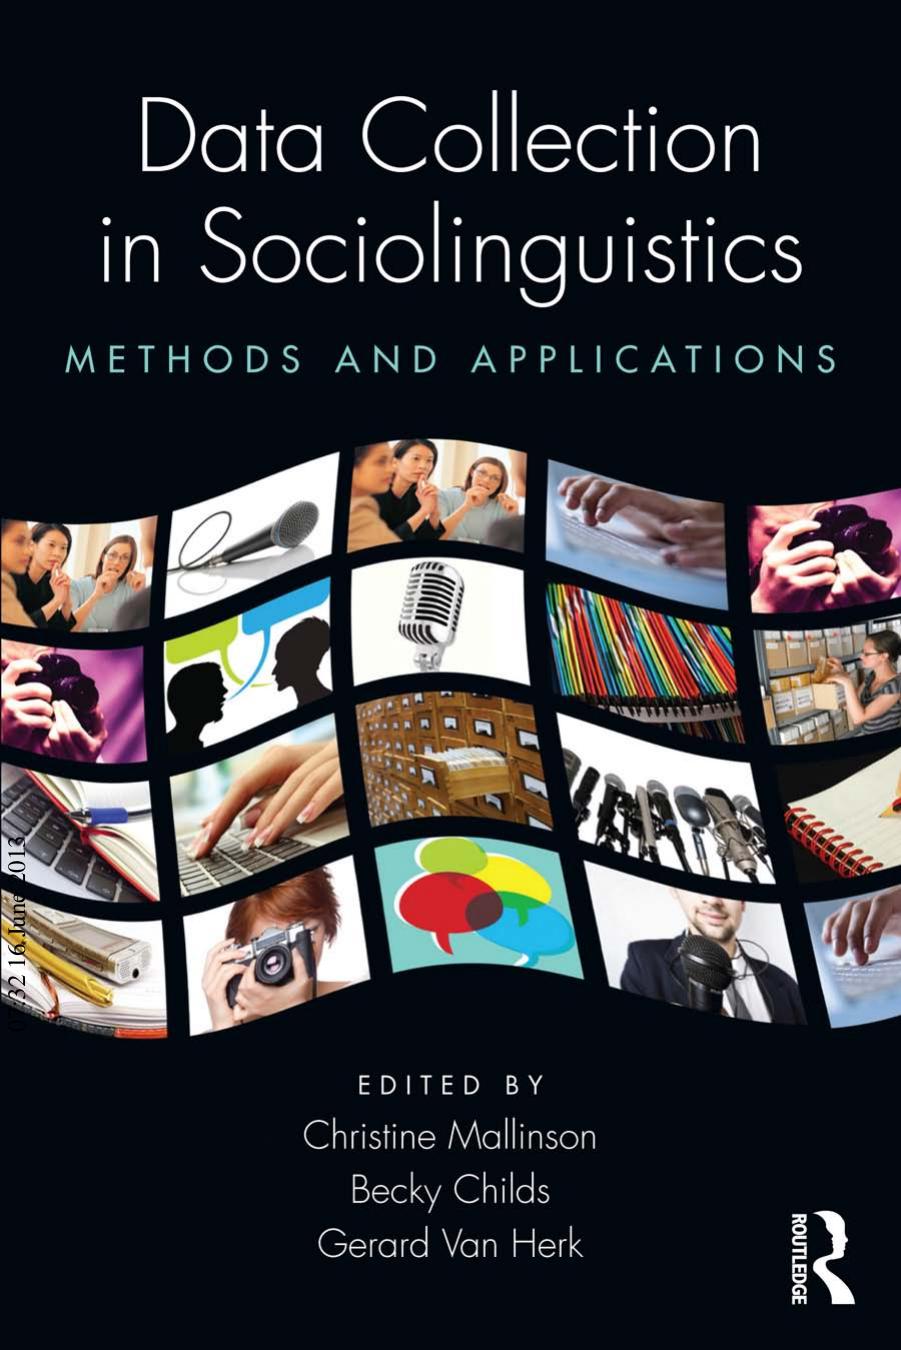 Data Collection in Sociolinguistics: Methods and Applications